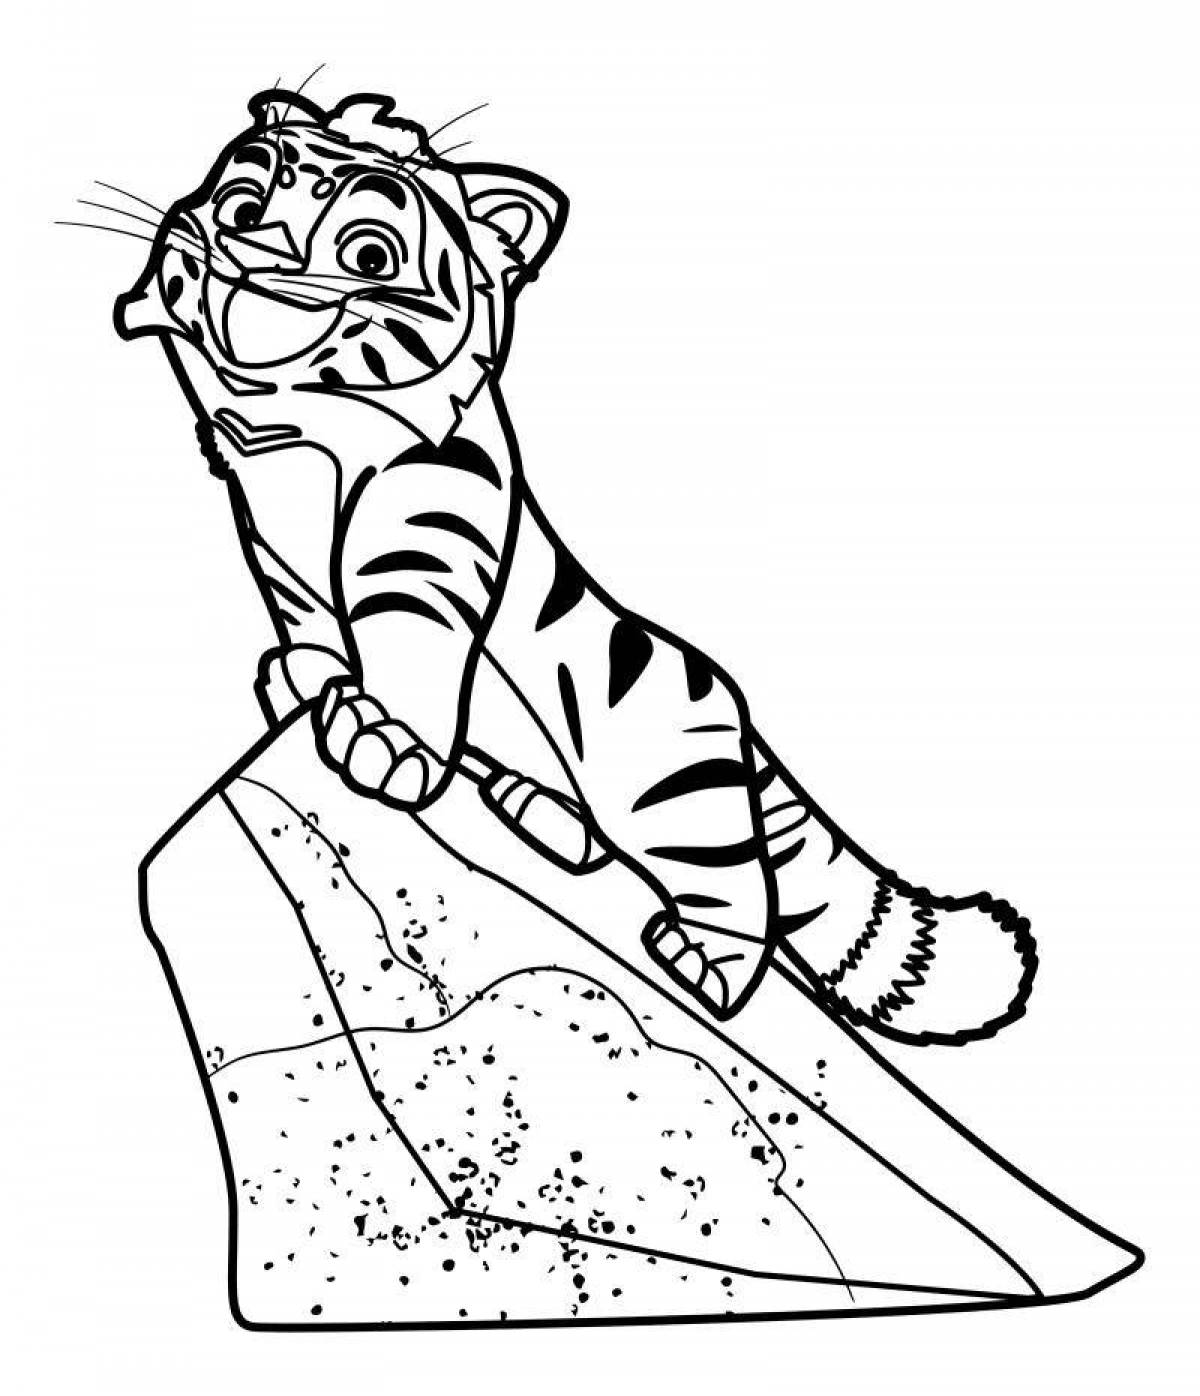 Tig and Leo animated coloring page